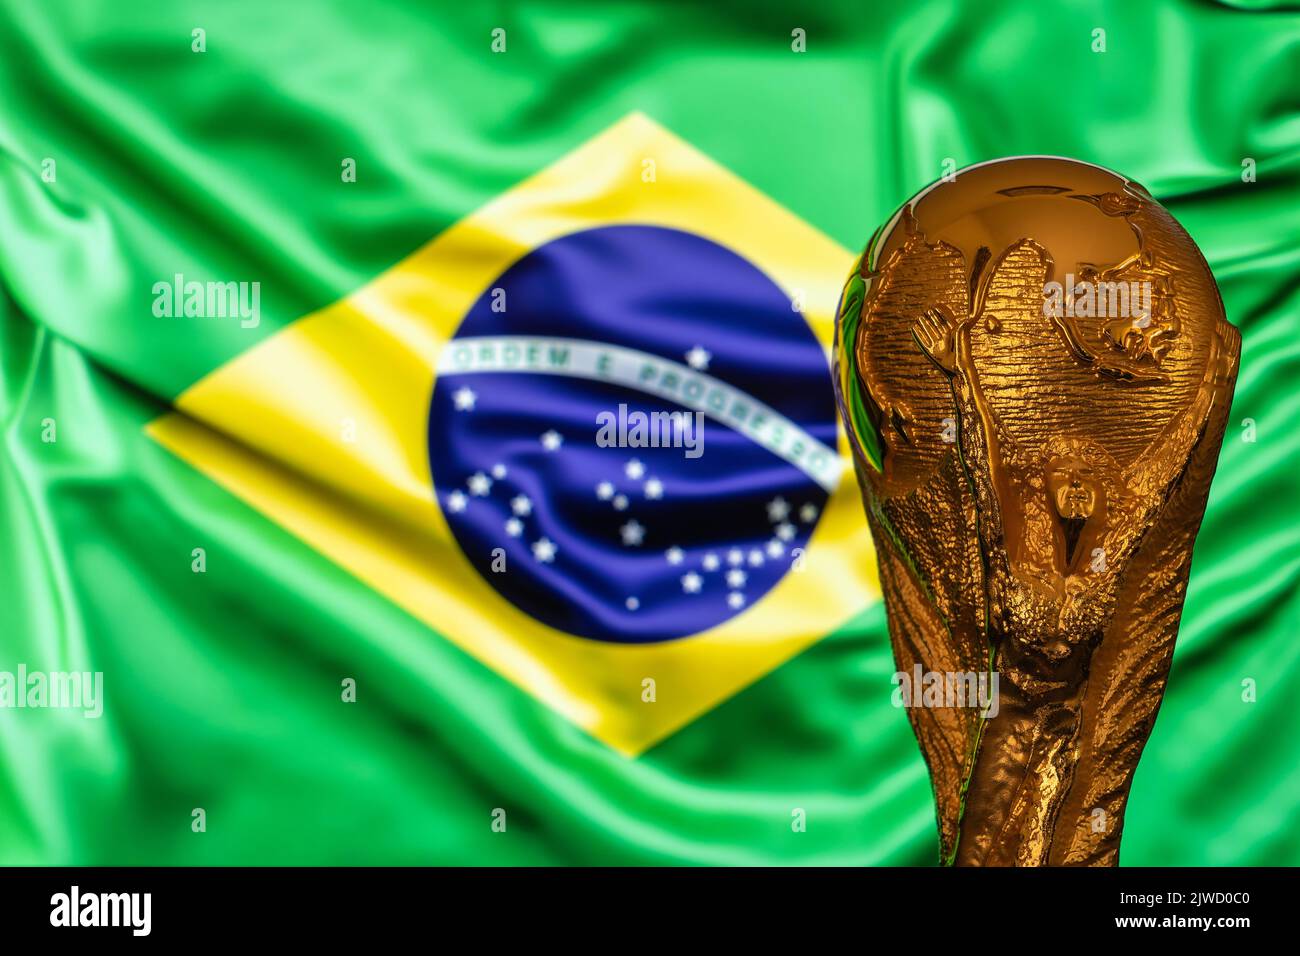 Doha, Qatar - September 4, 2022: FIFA World Cup trophy against the background of Brazil flag. Stock Photo